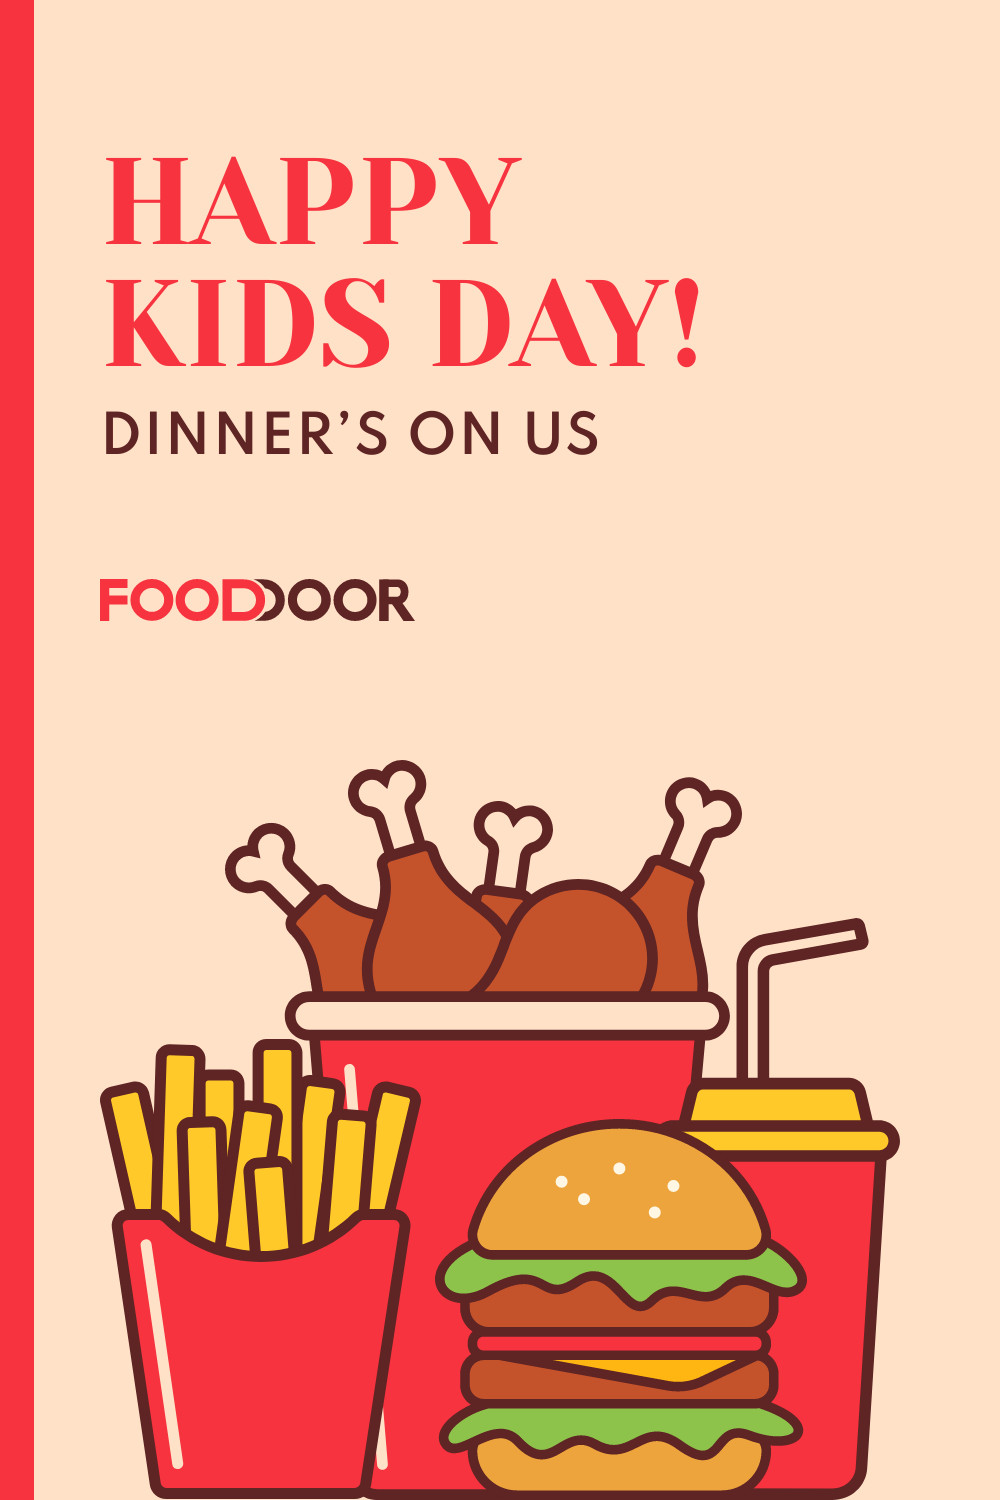 Happy Kids Day Free Dinner Facebook Cover 820x360